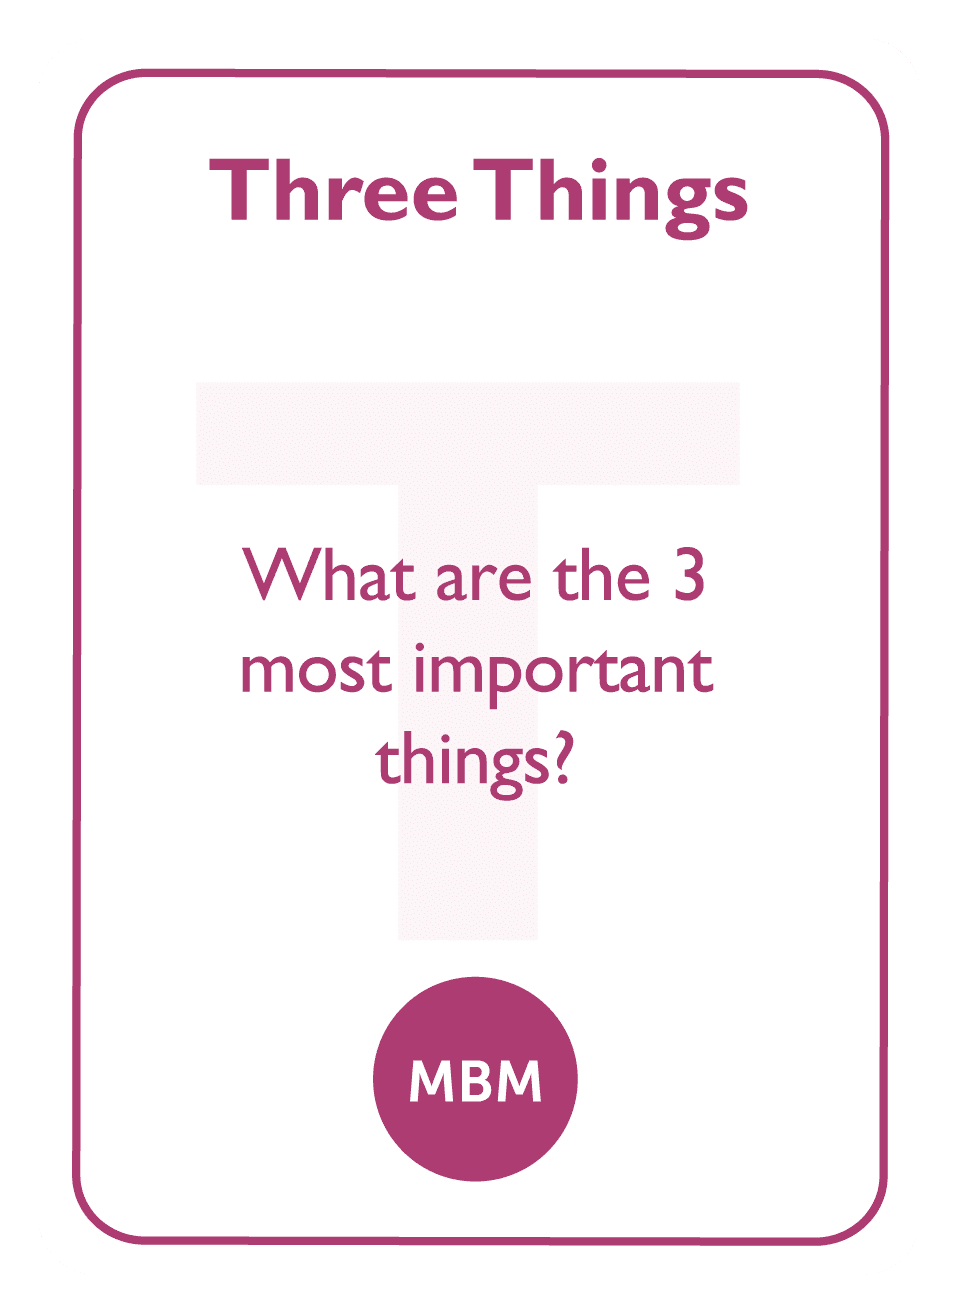 Coaching card titled Three Things